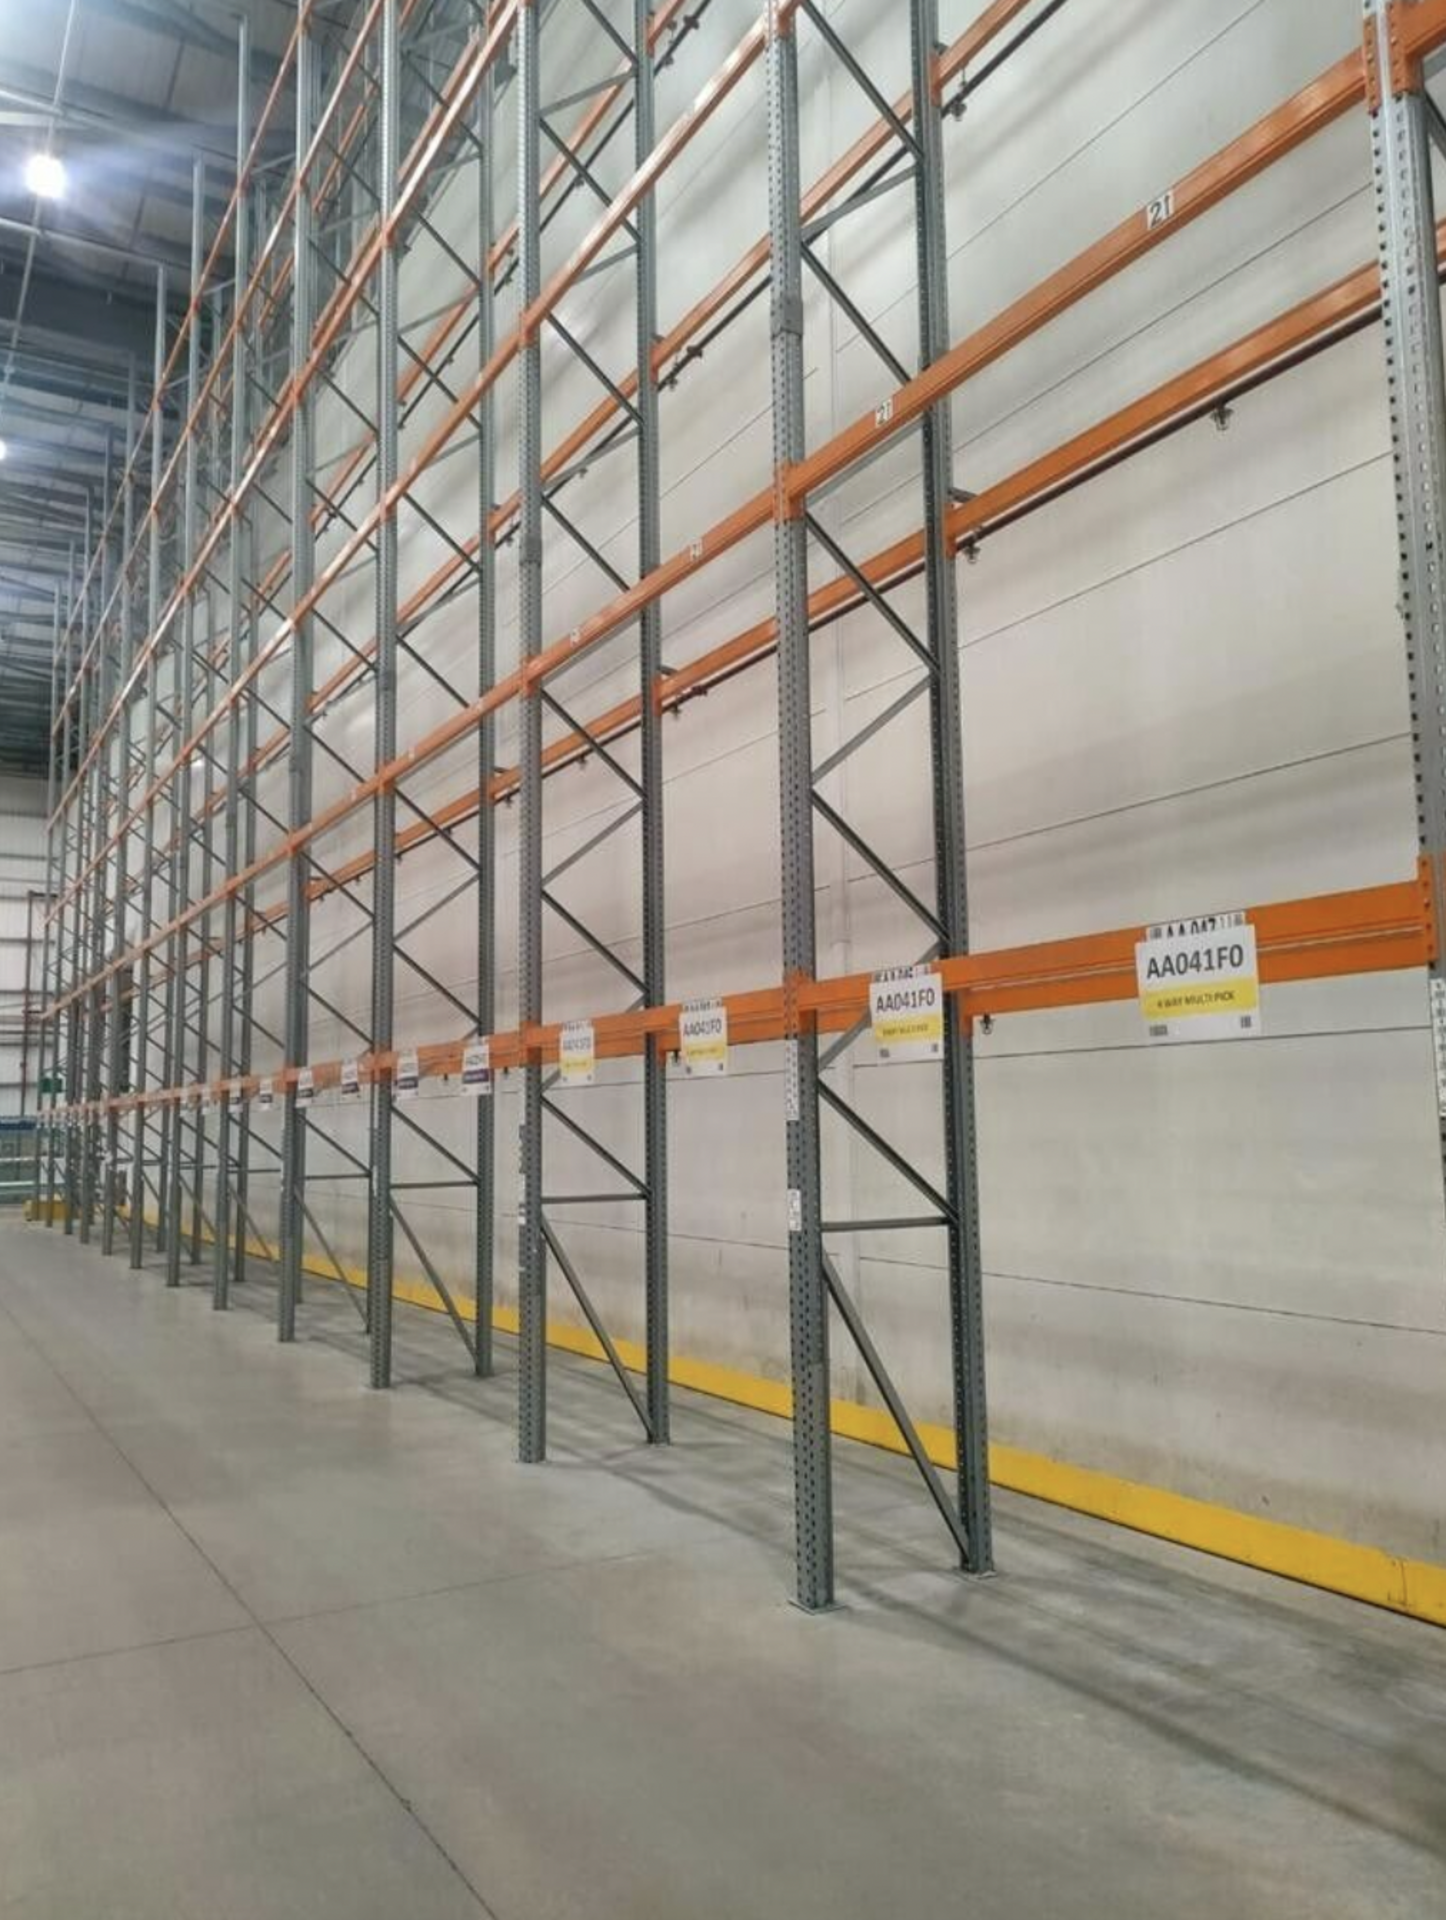 39 Bays of Industrial Pallet Racking - 10 runs of 5 - 2000kg per level